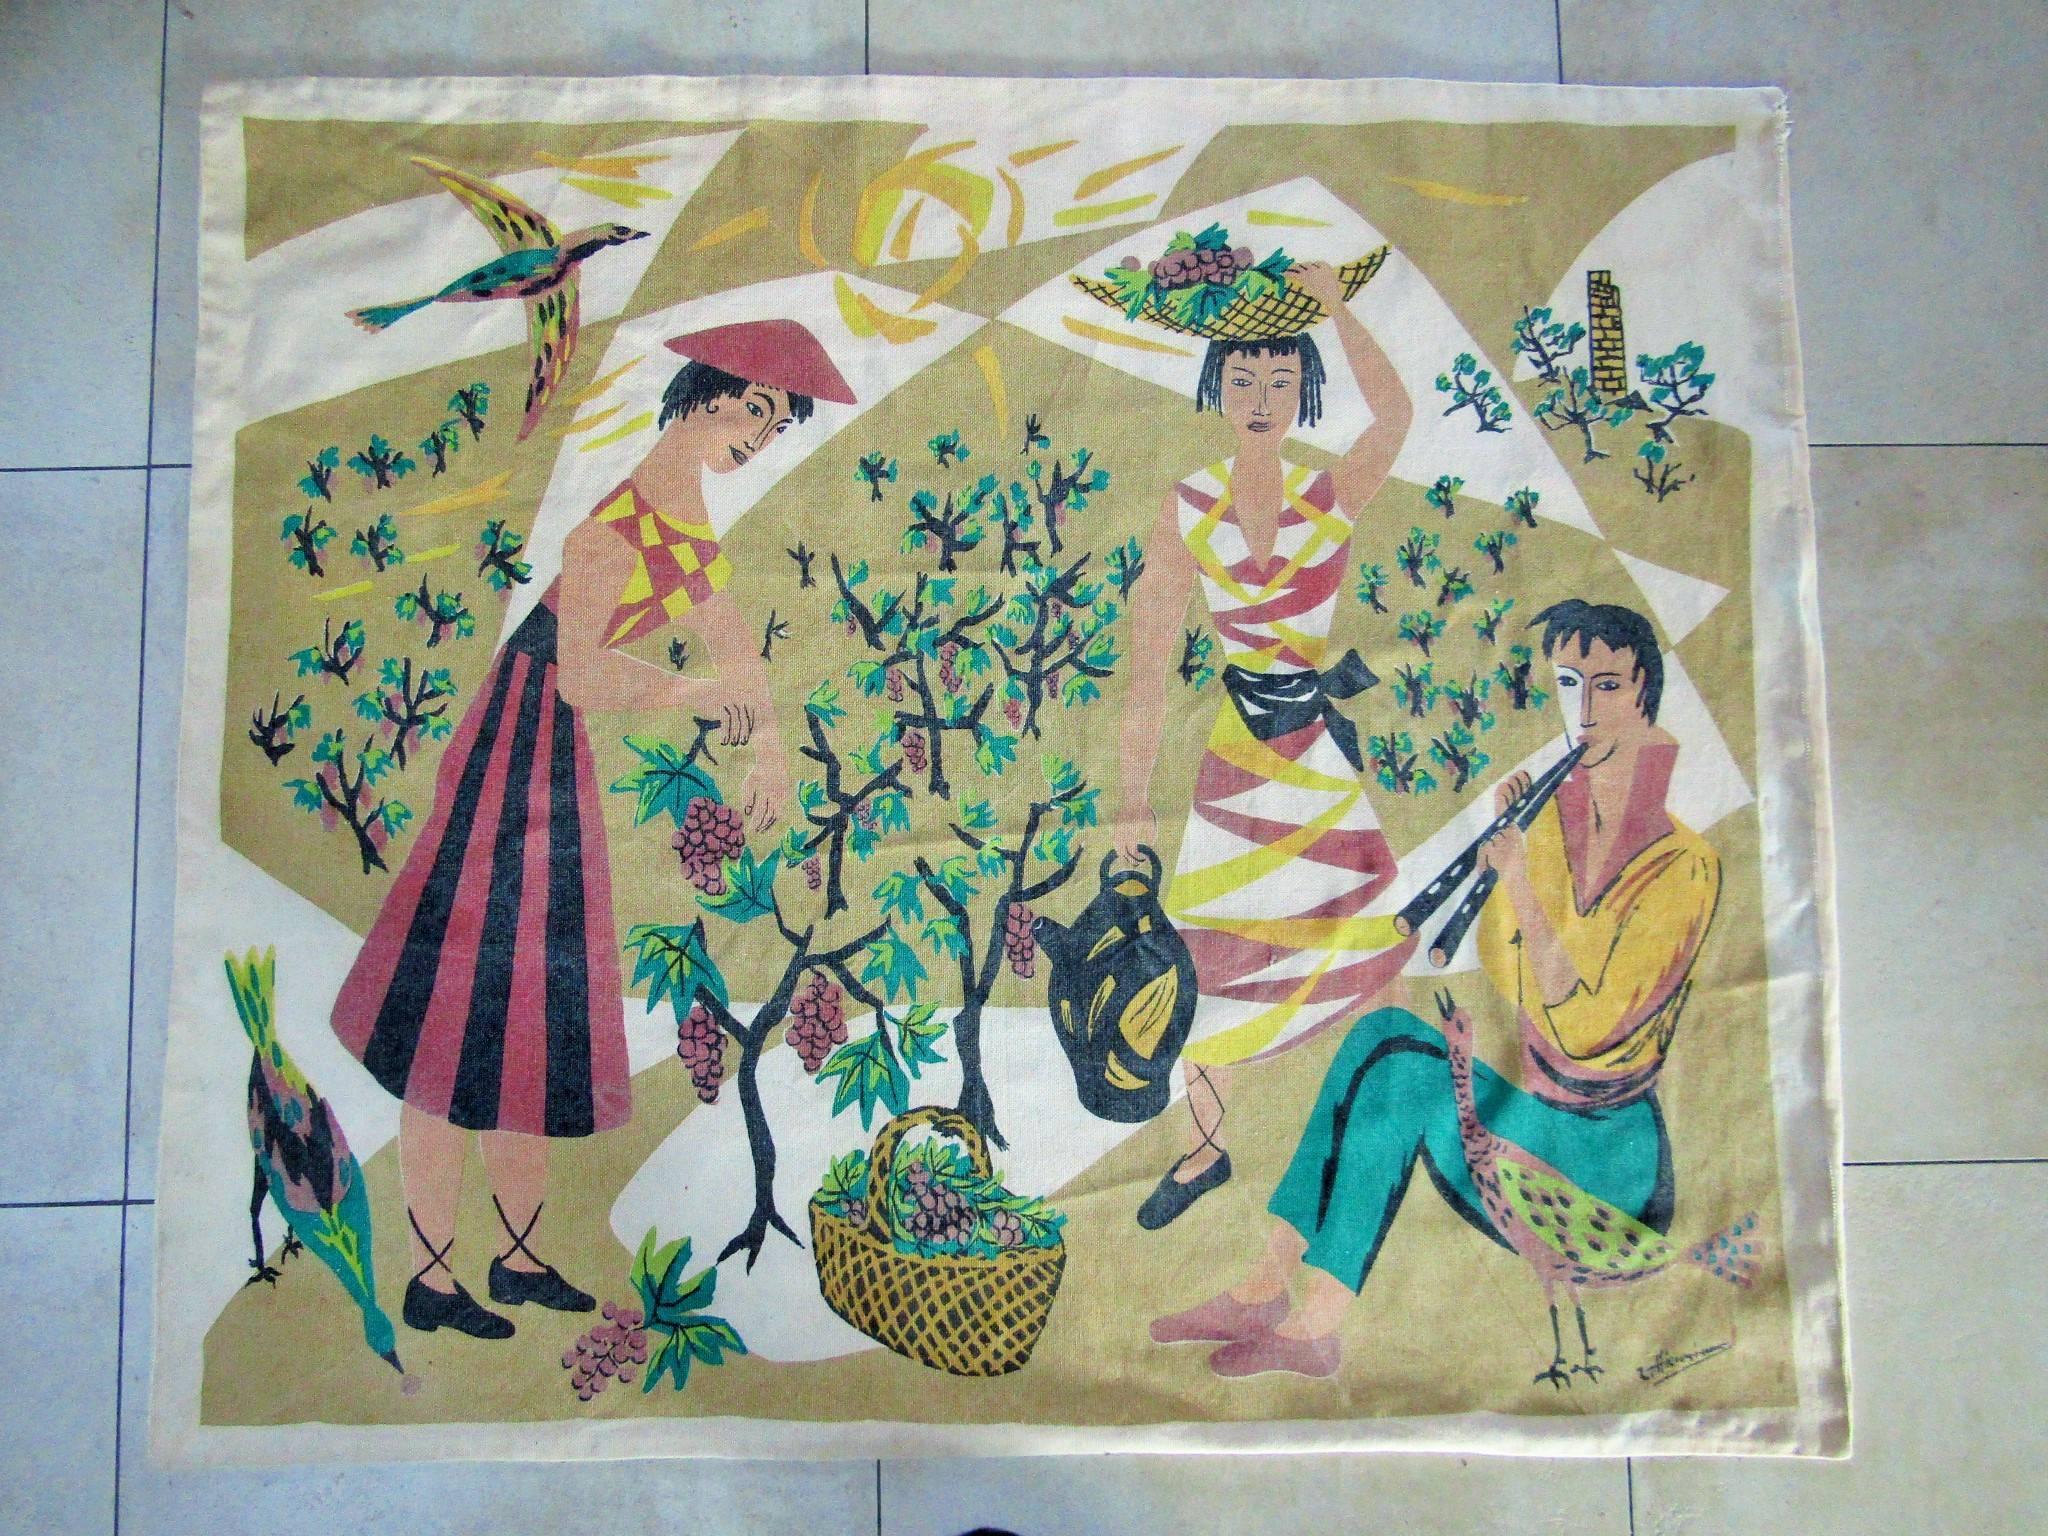 French midcentury tapestry labeled by Manufacturer Corot, France, circa 1965. Cubistic musician with girls scene.

Measures: Width 134 cm (52.8 in),
length 114 cm (44.9 in).

Note: 1960s cubism!

Free shipping worldwide!